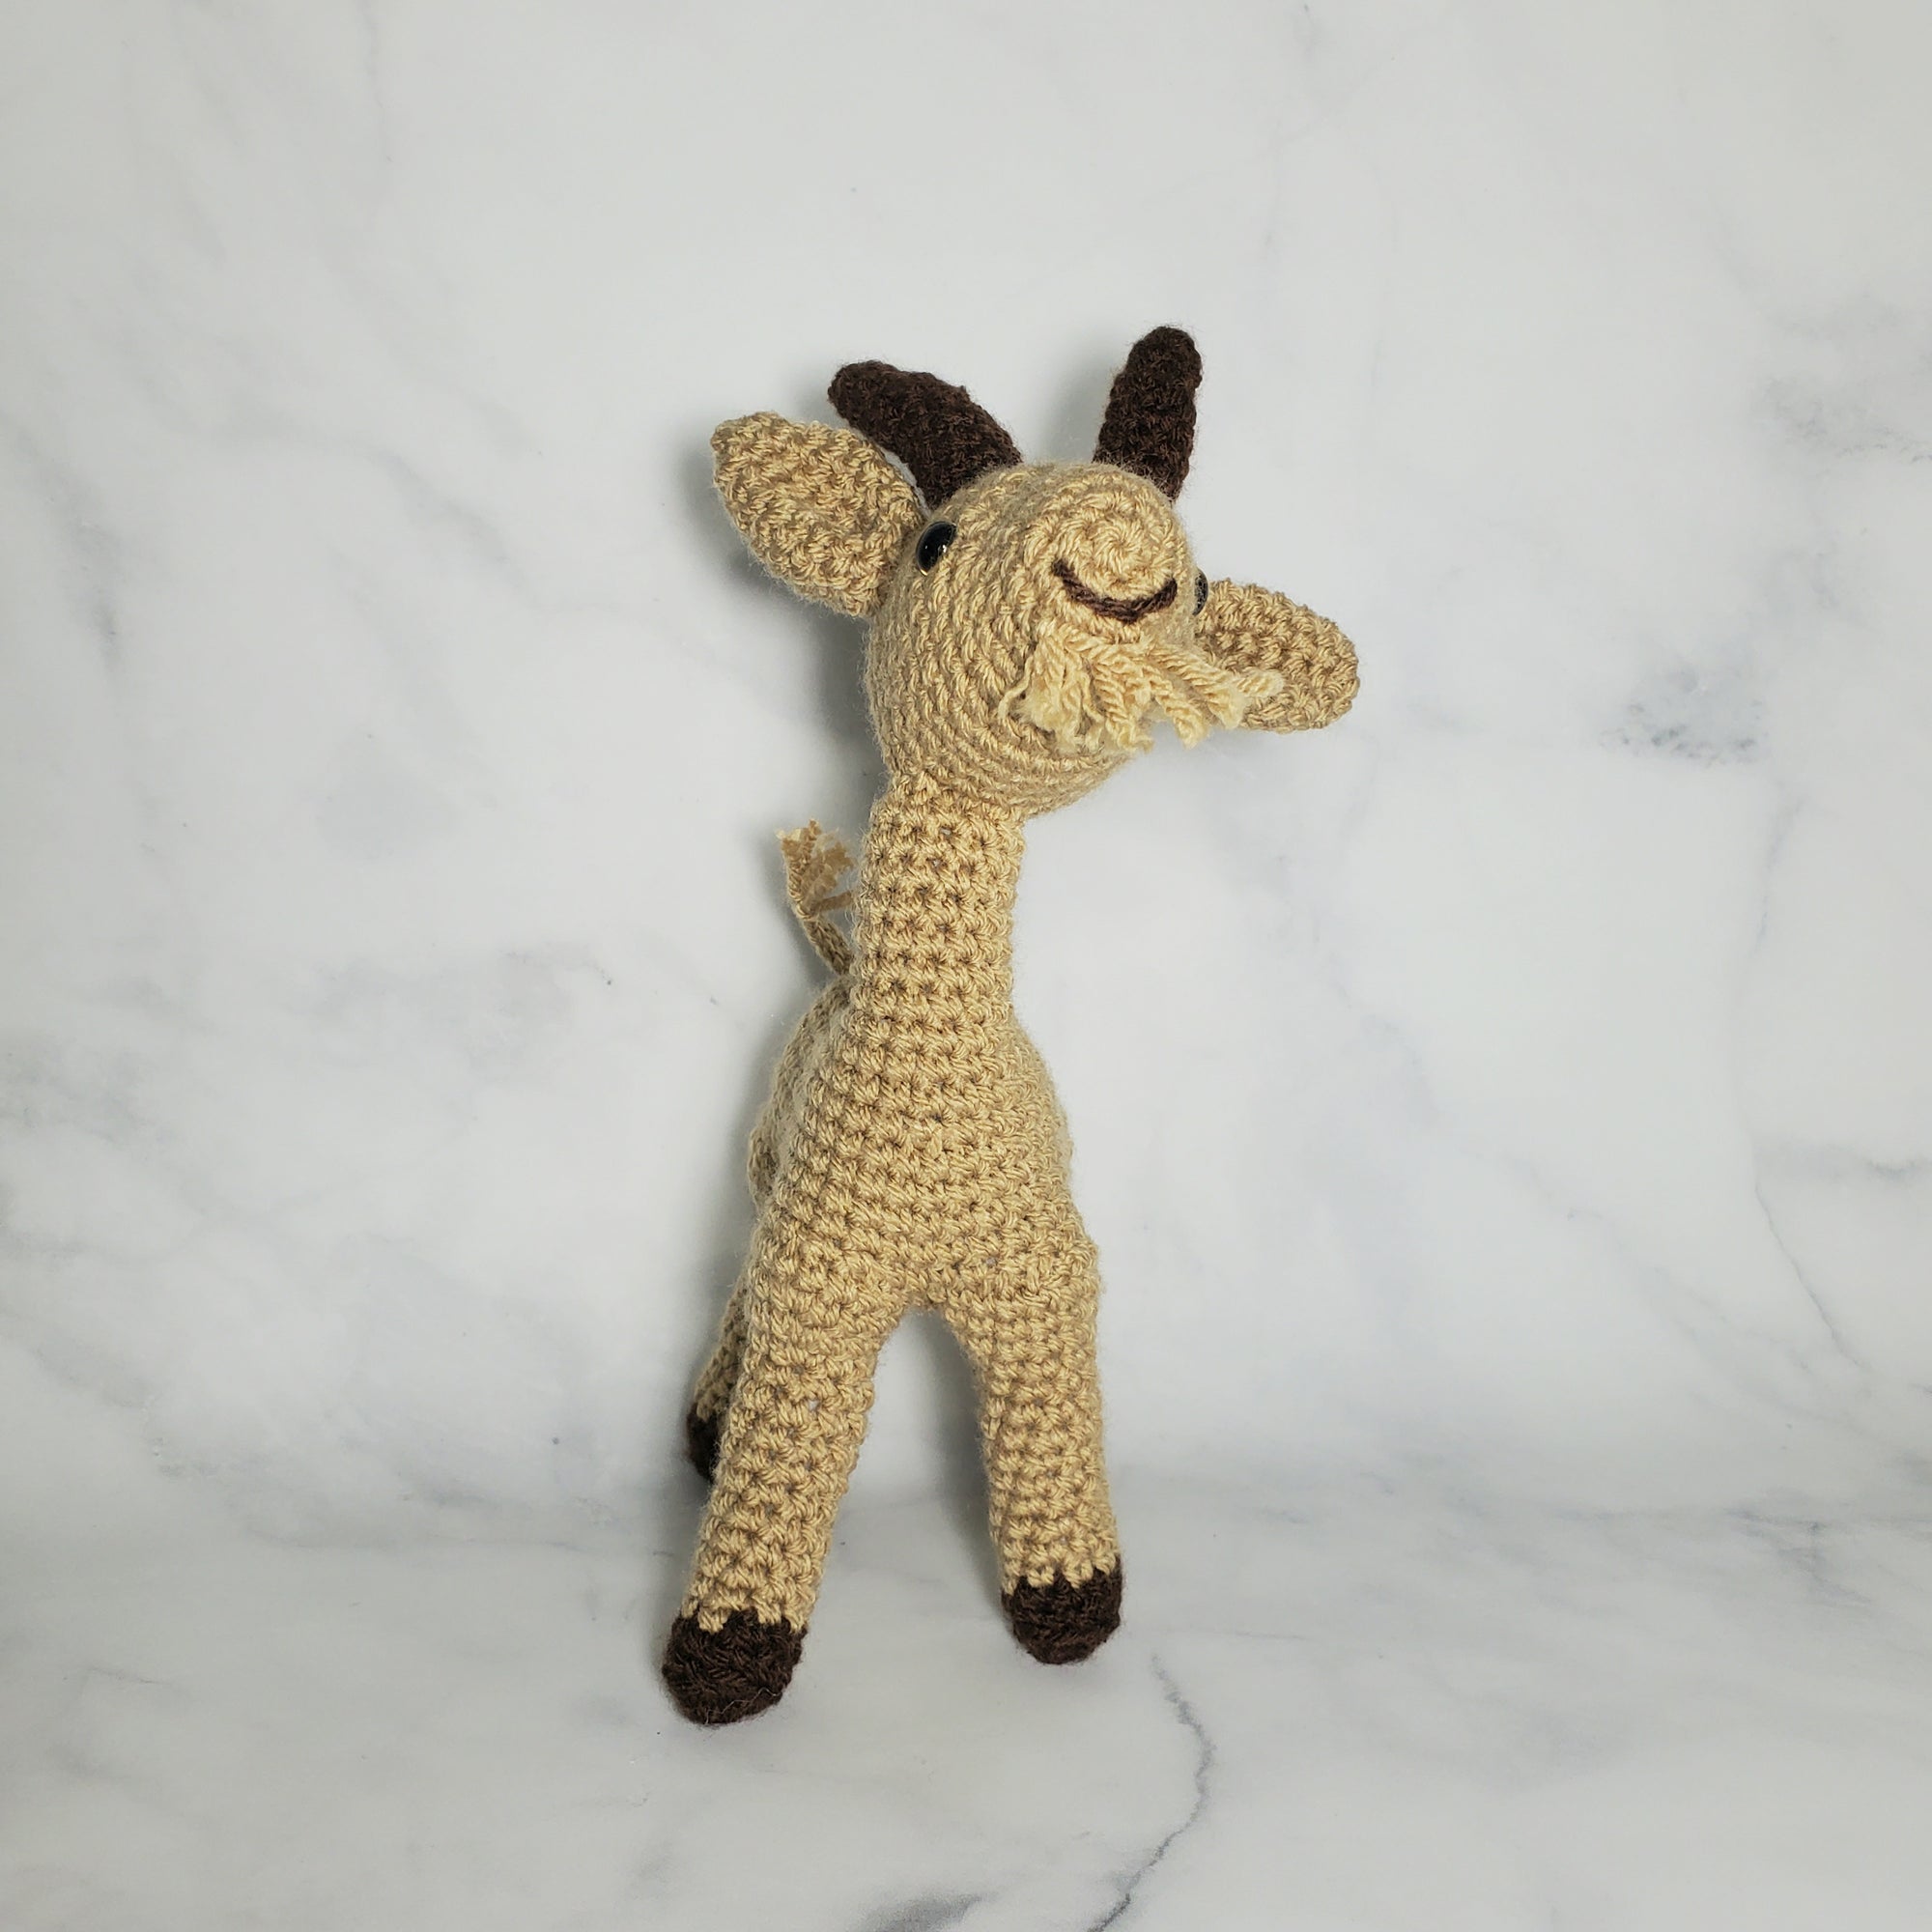 Goat Plush Toy - 9 Inches